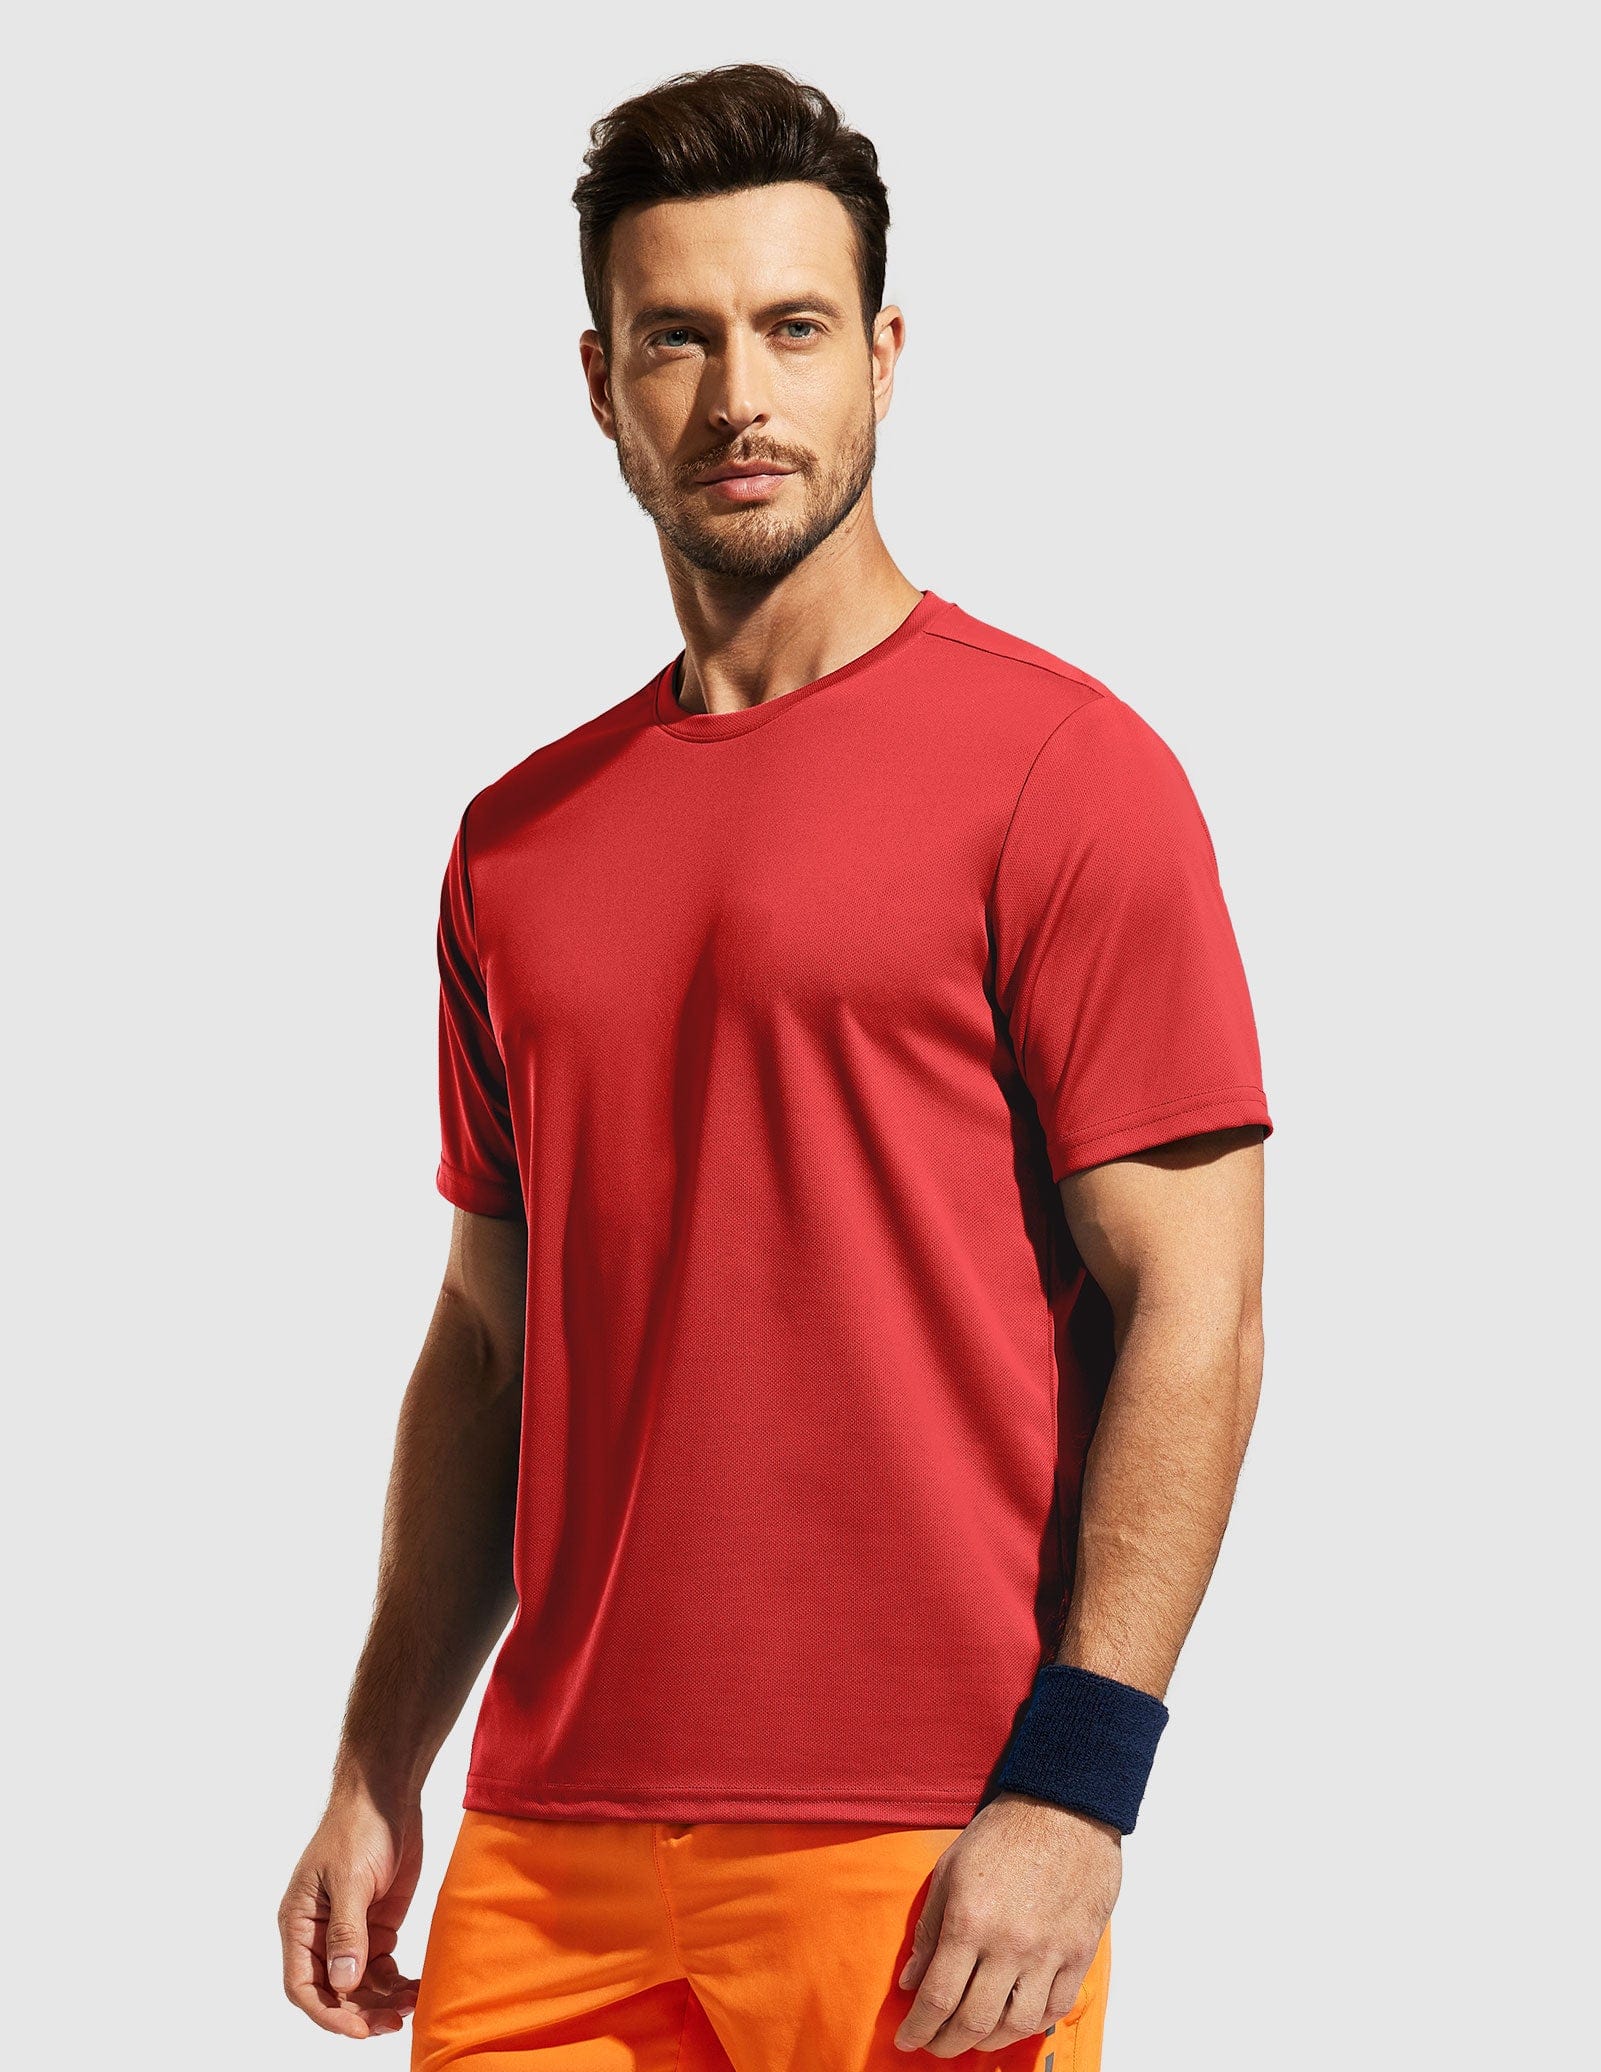 Men's Dry Fit Workout T-shirts for Gym Athletic Running Men Shirts Red / S MIER